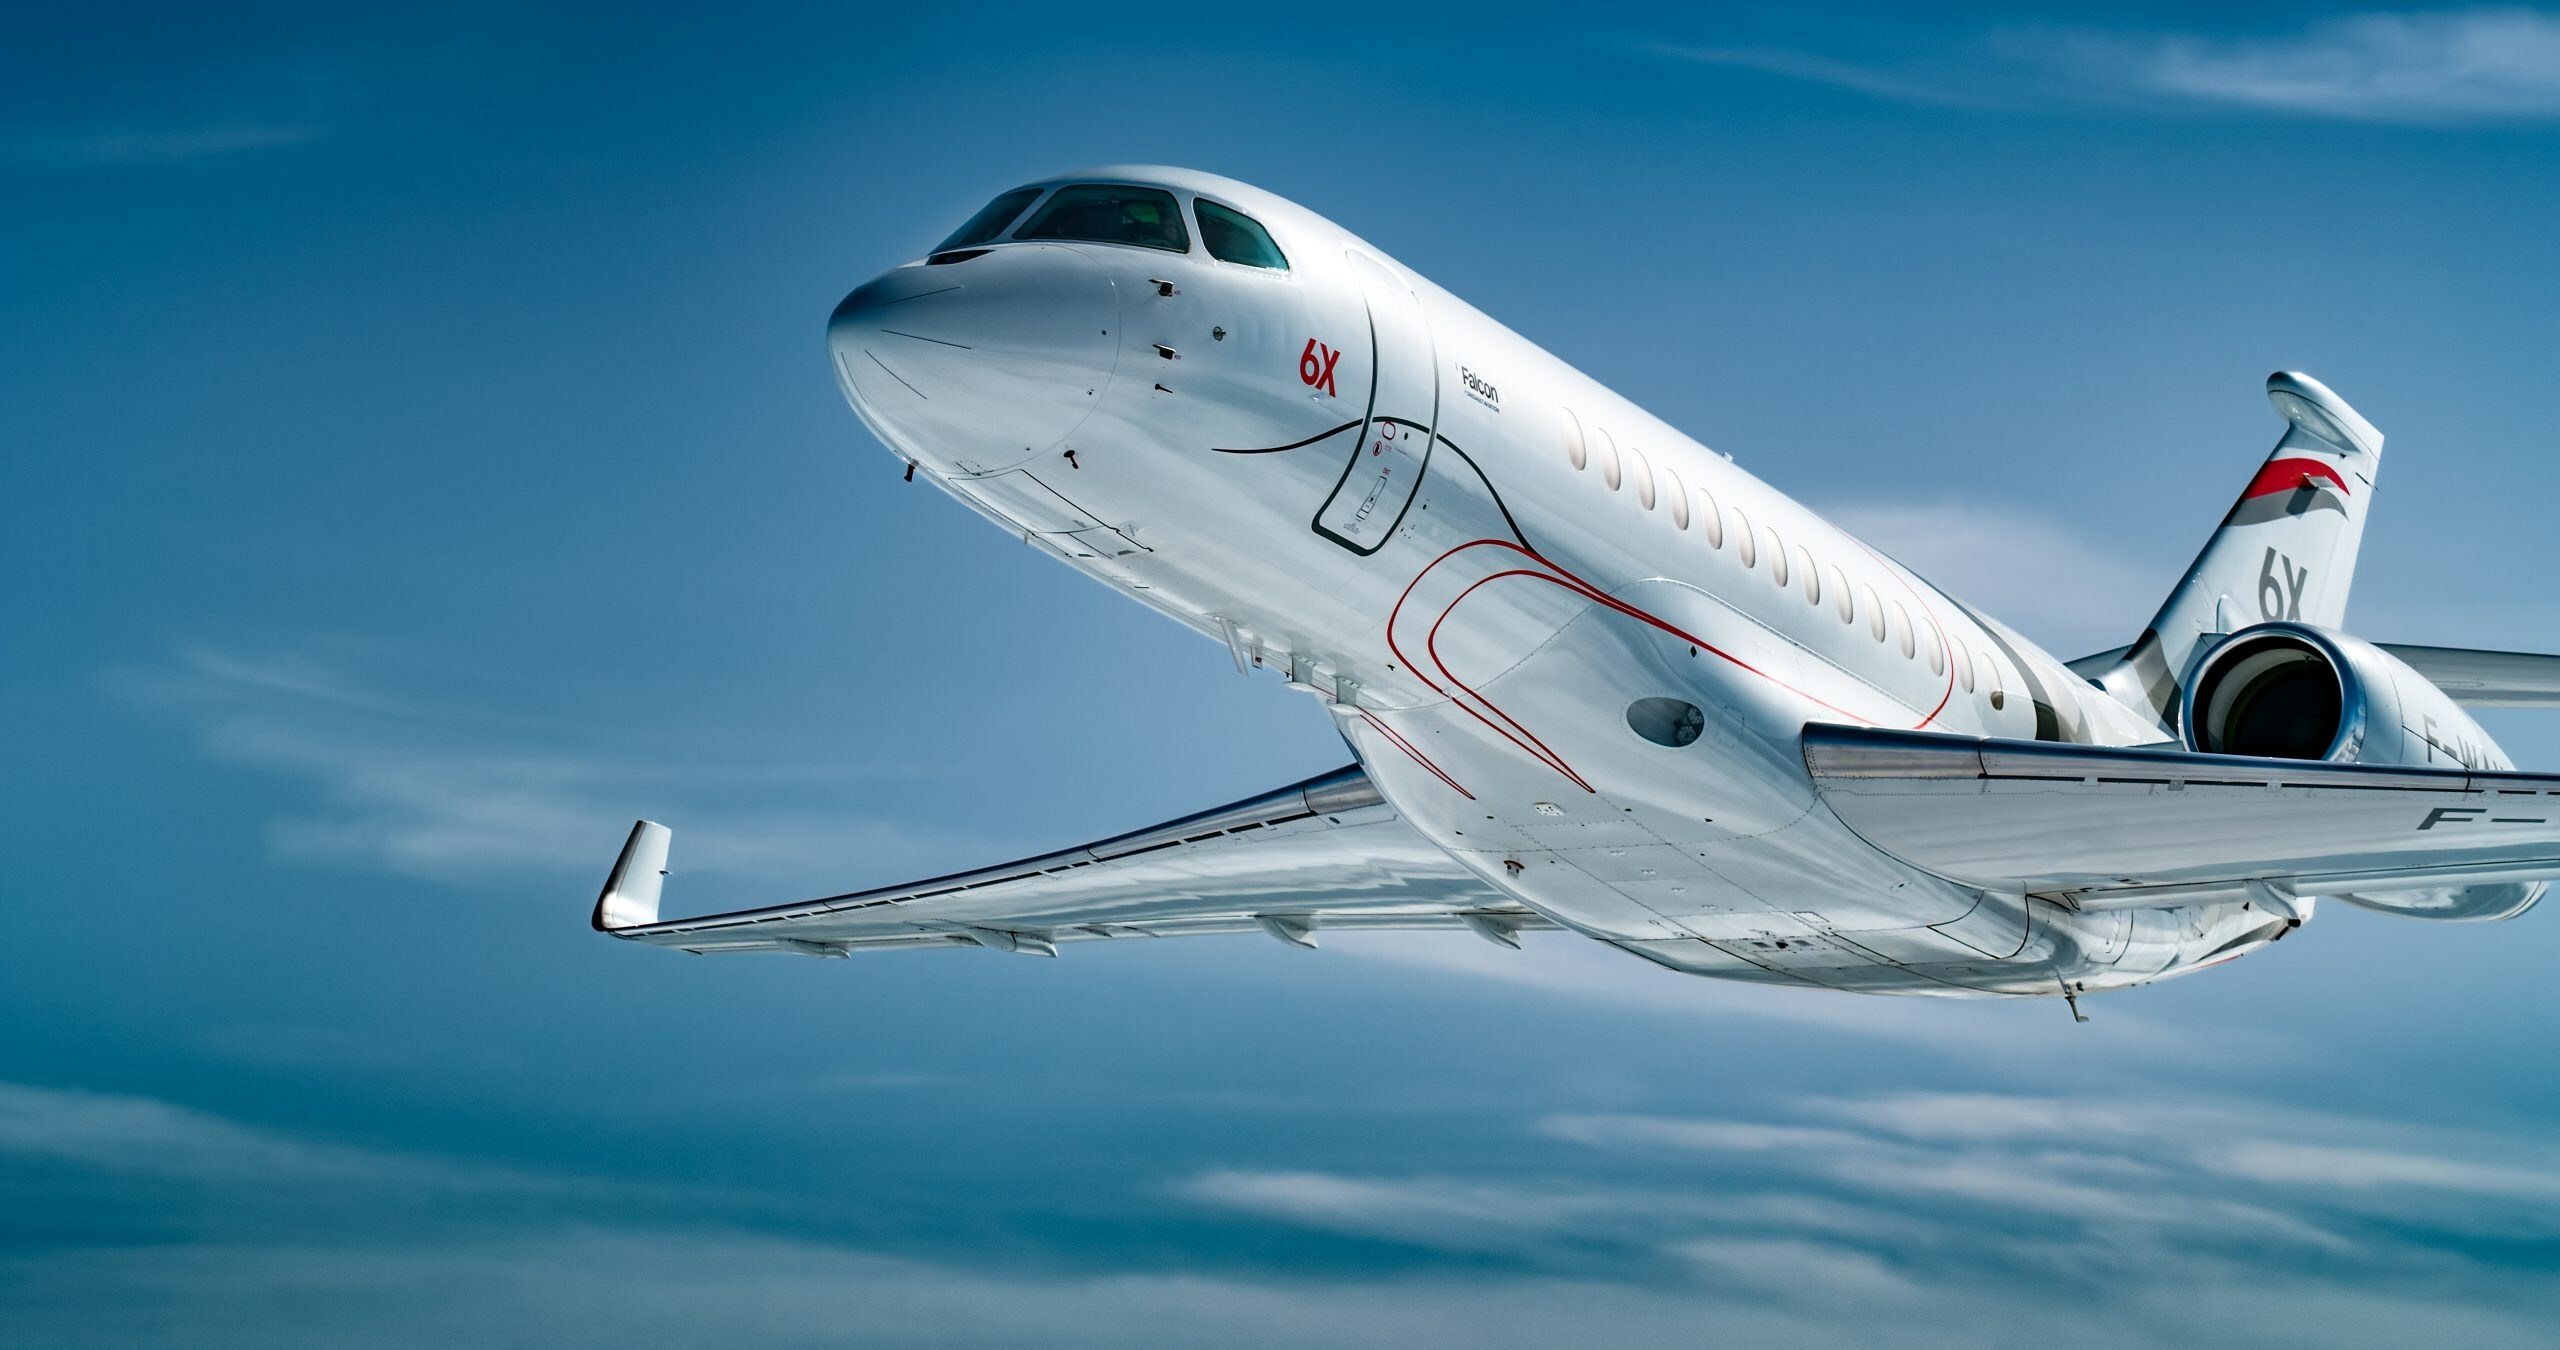 RTX's Pratt & Whitney Canada and Dassault Aviation celebrate the entry into service of the PW812D-powered Falcon 6X business jet